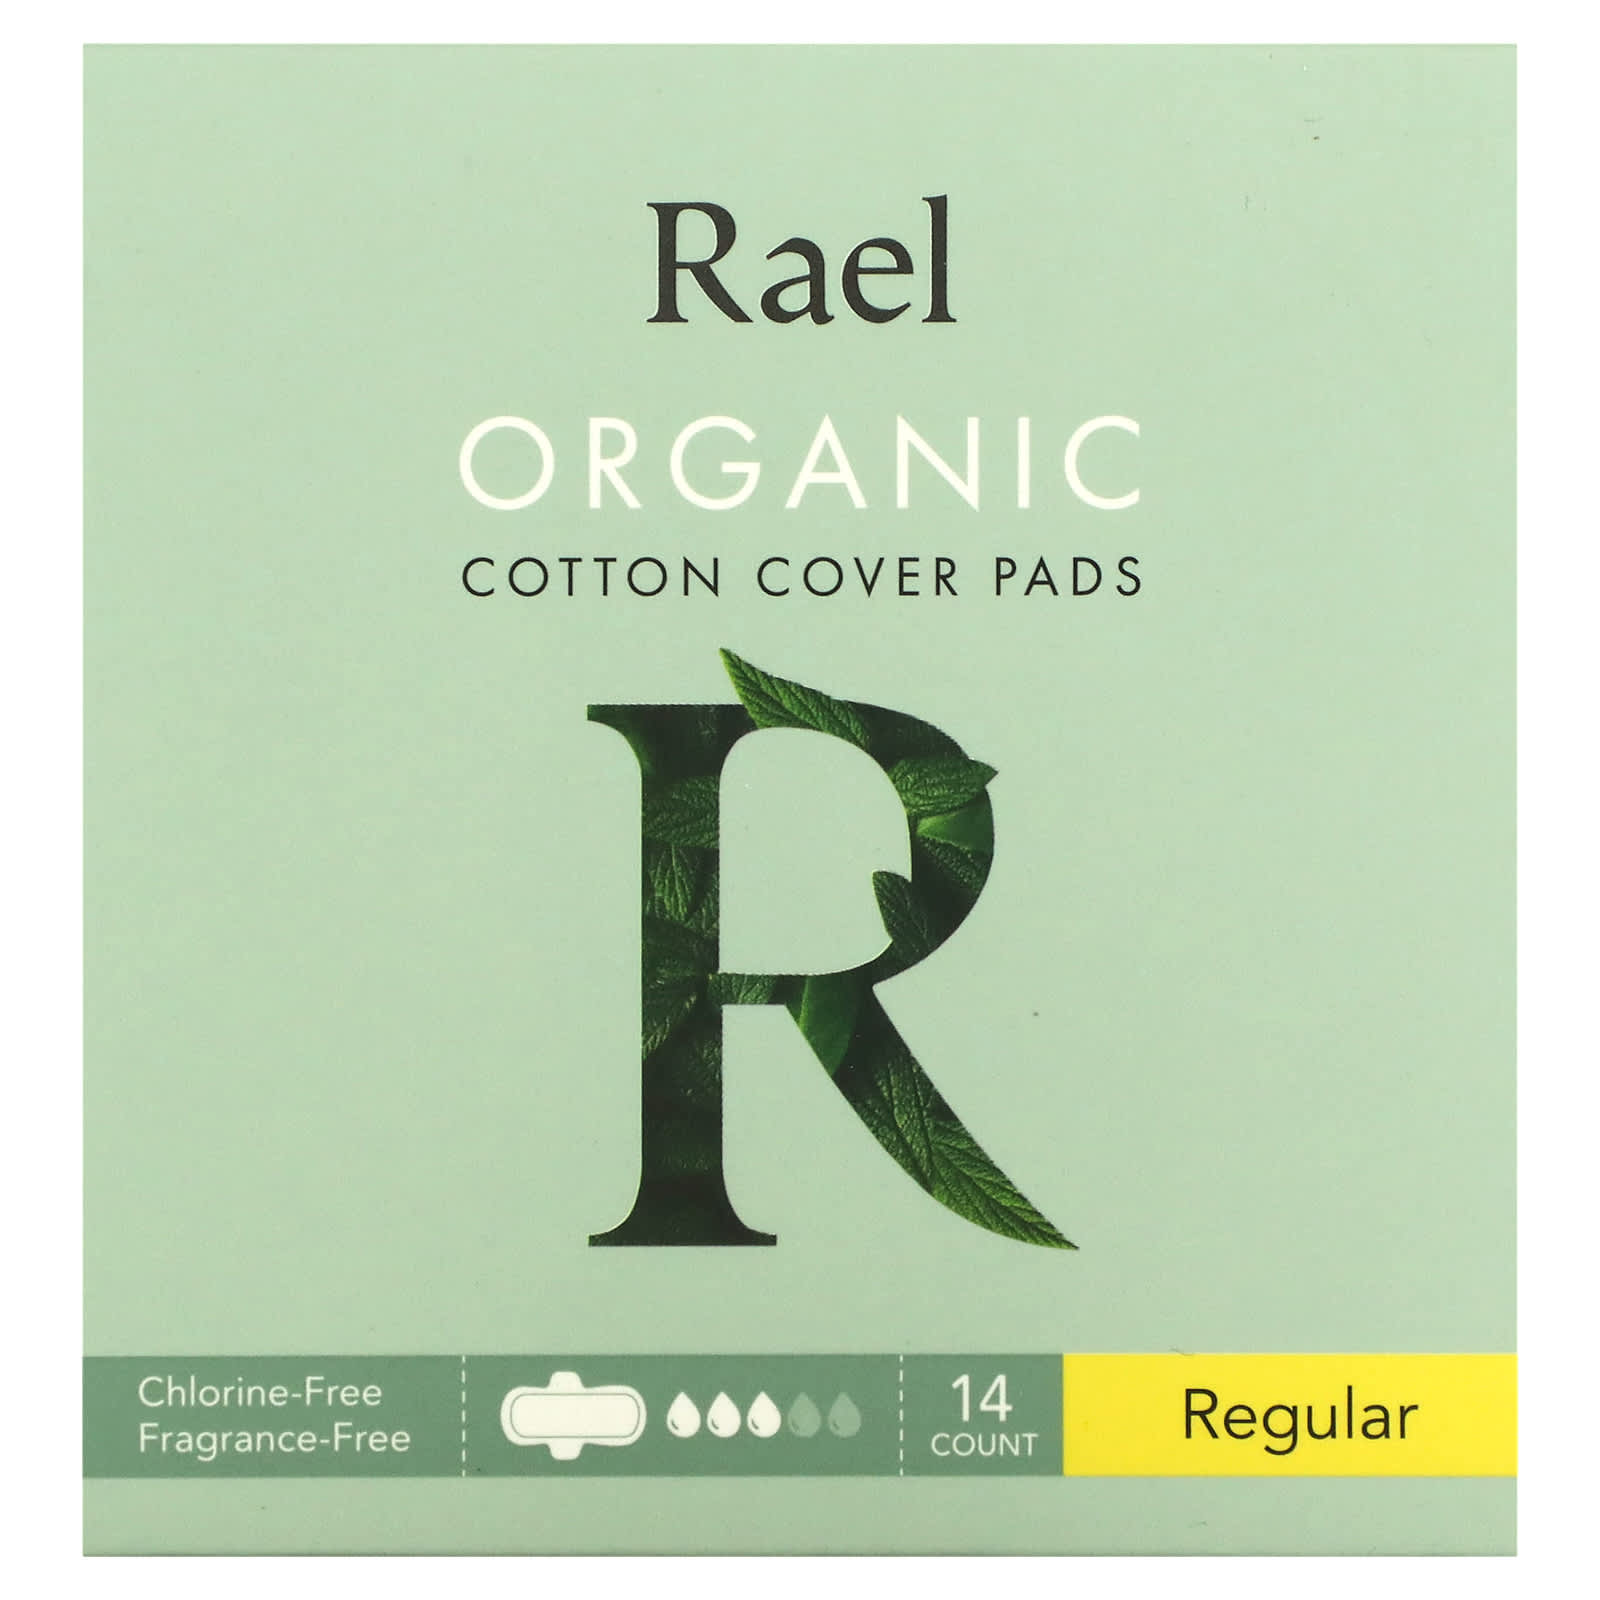 Organic Cotton Cover Pads, Regular, 14 Count